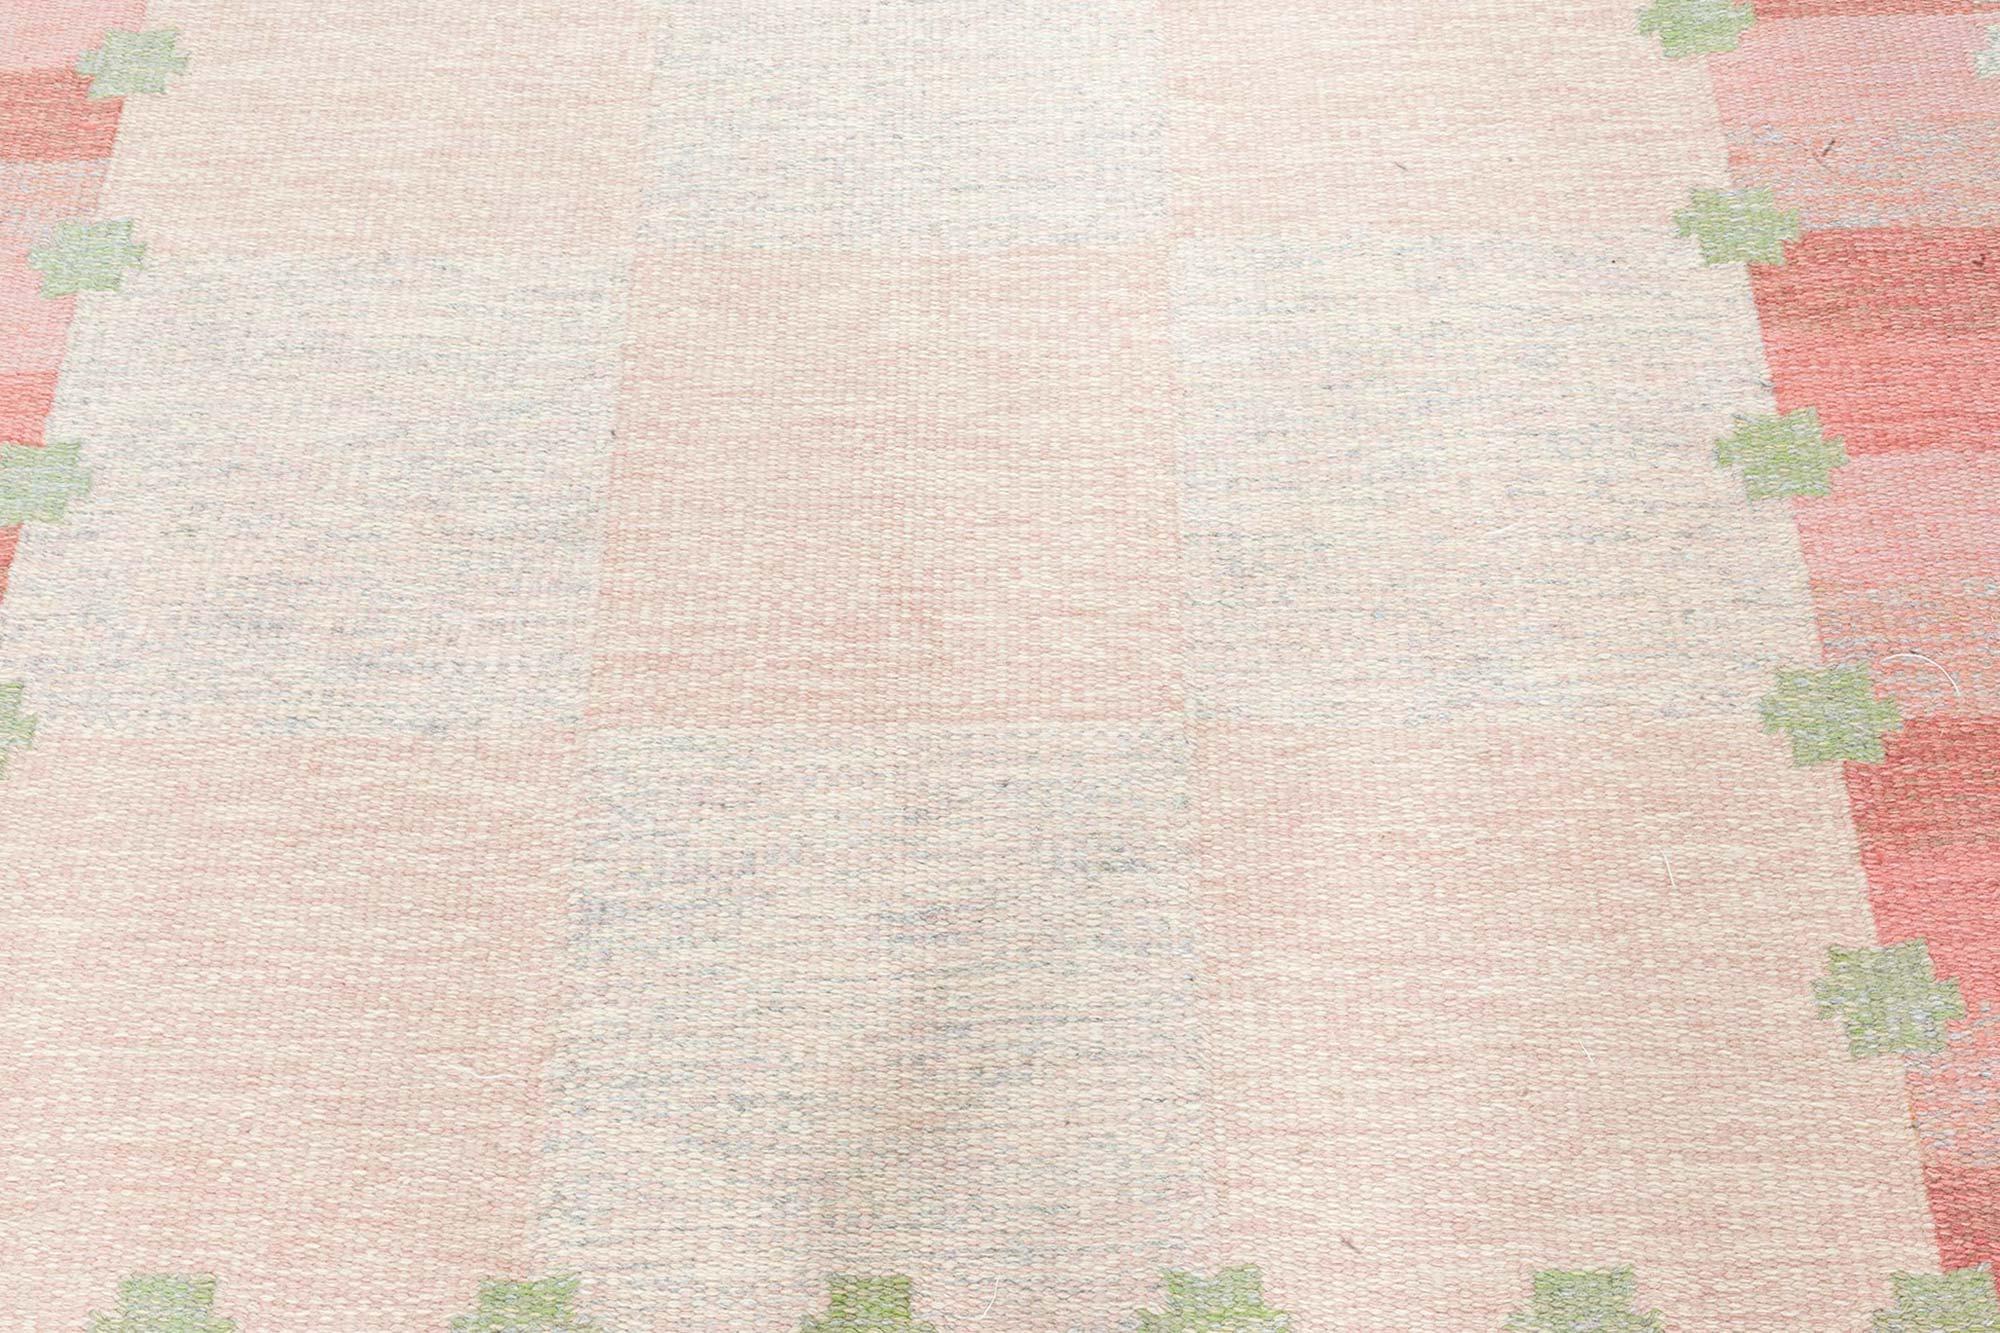 Hand-Woven Mid-20th Century Swedish Delicate Pink Geometric Rug by Agda Osterberg For Sale